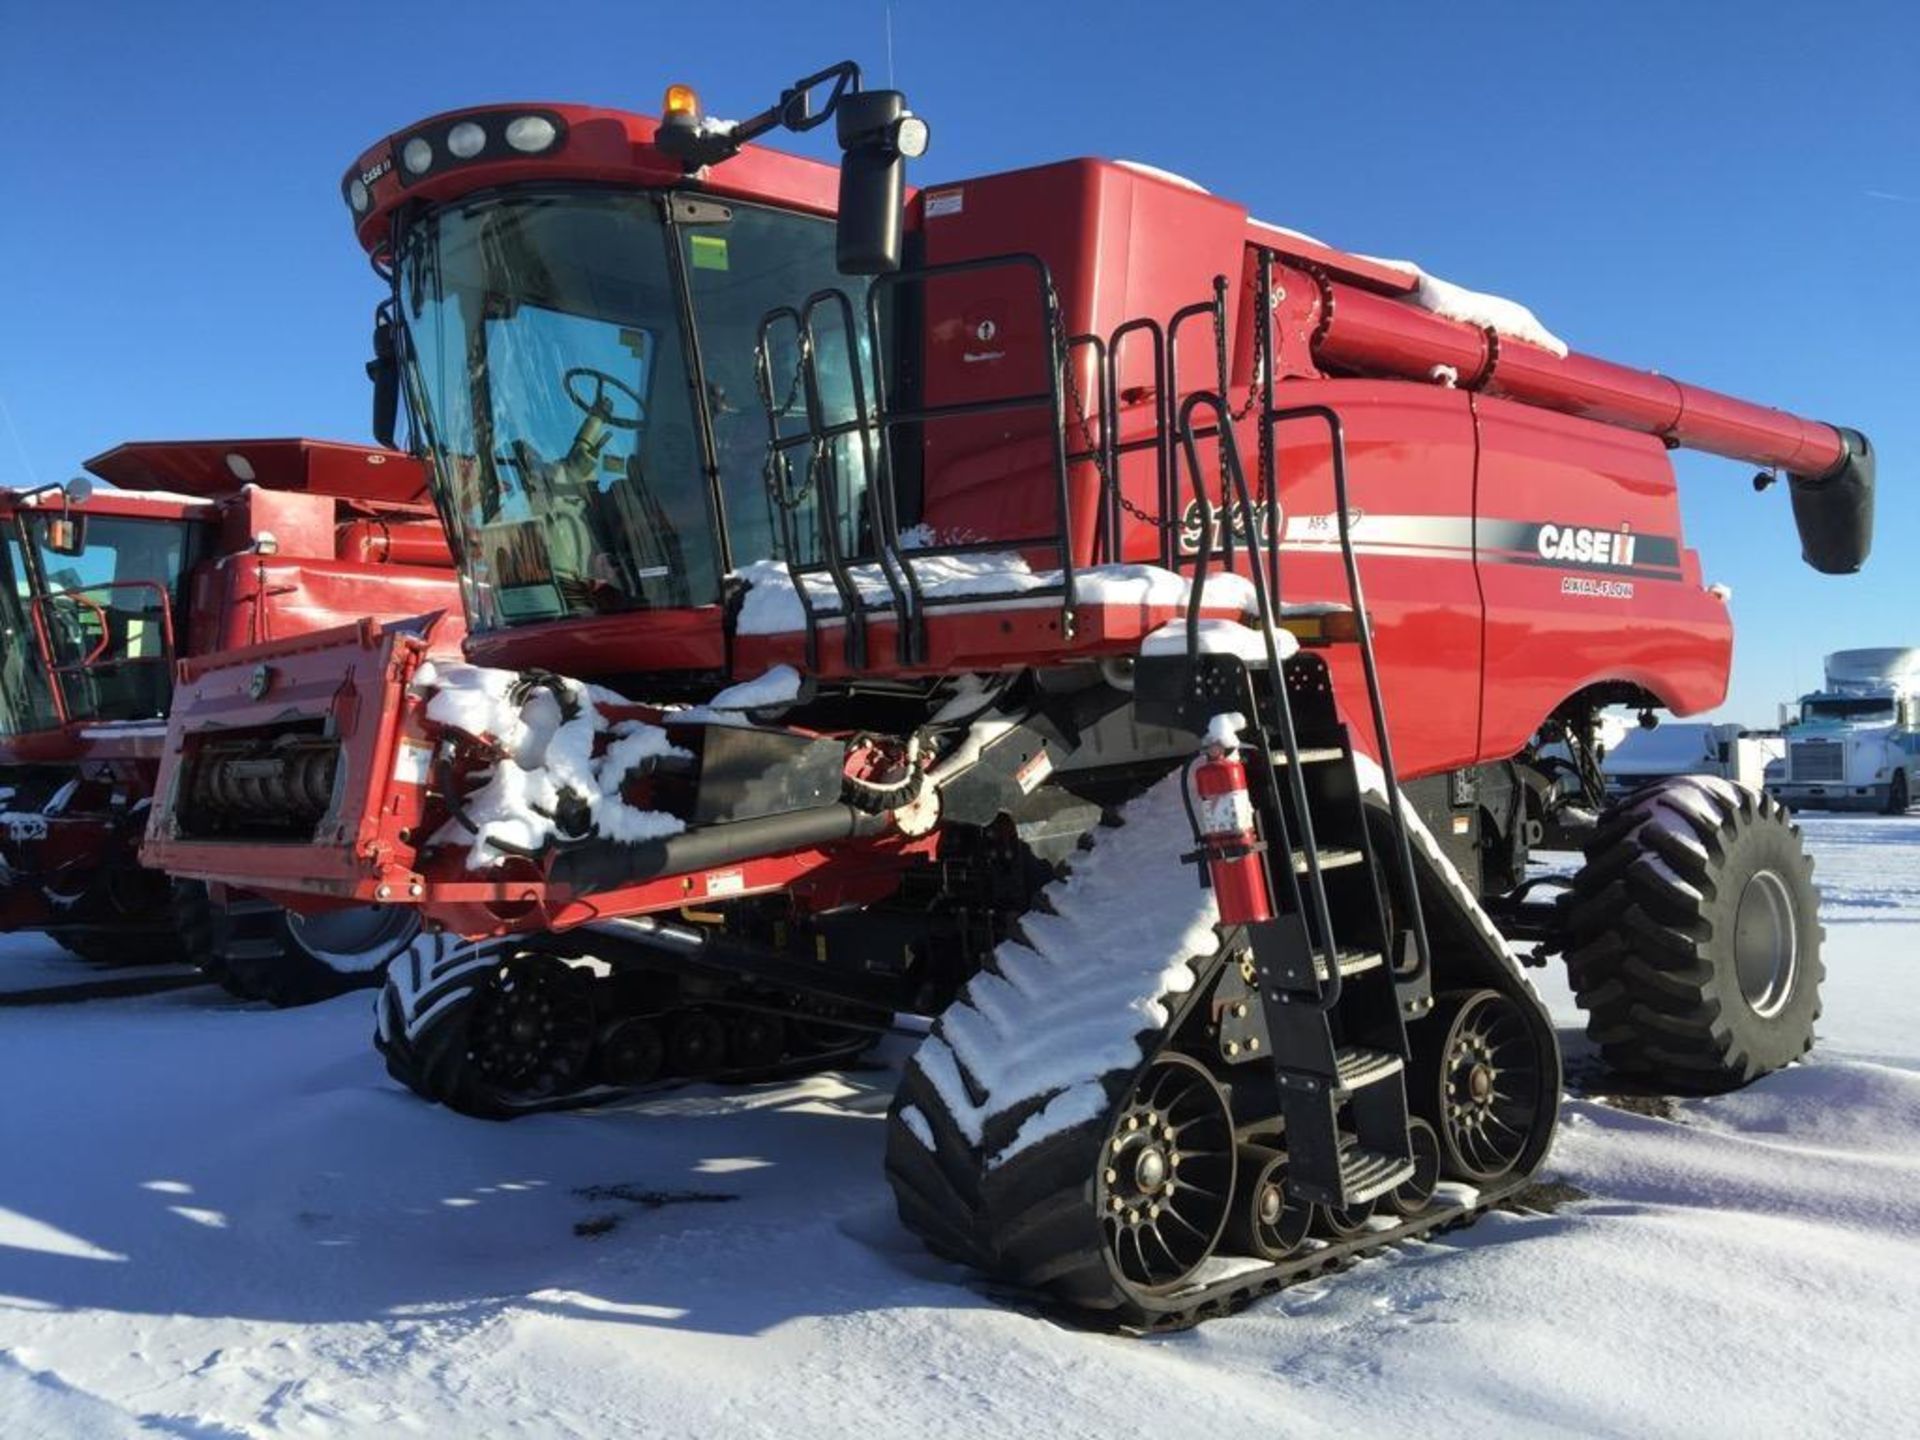 Lot 16 - 2009 Case IH 9120 Combine, auto steer, gps monitor , 36" factory tracks , 1200 sep hours, - Image 2 of 4